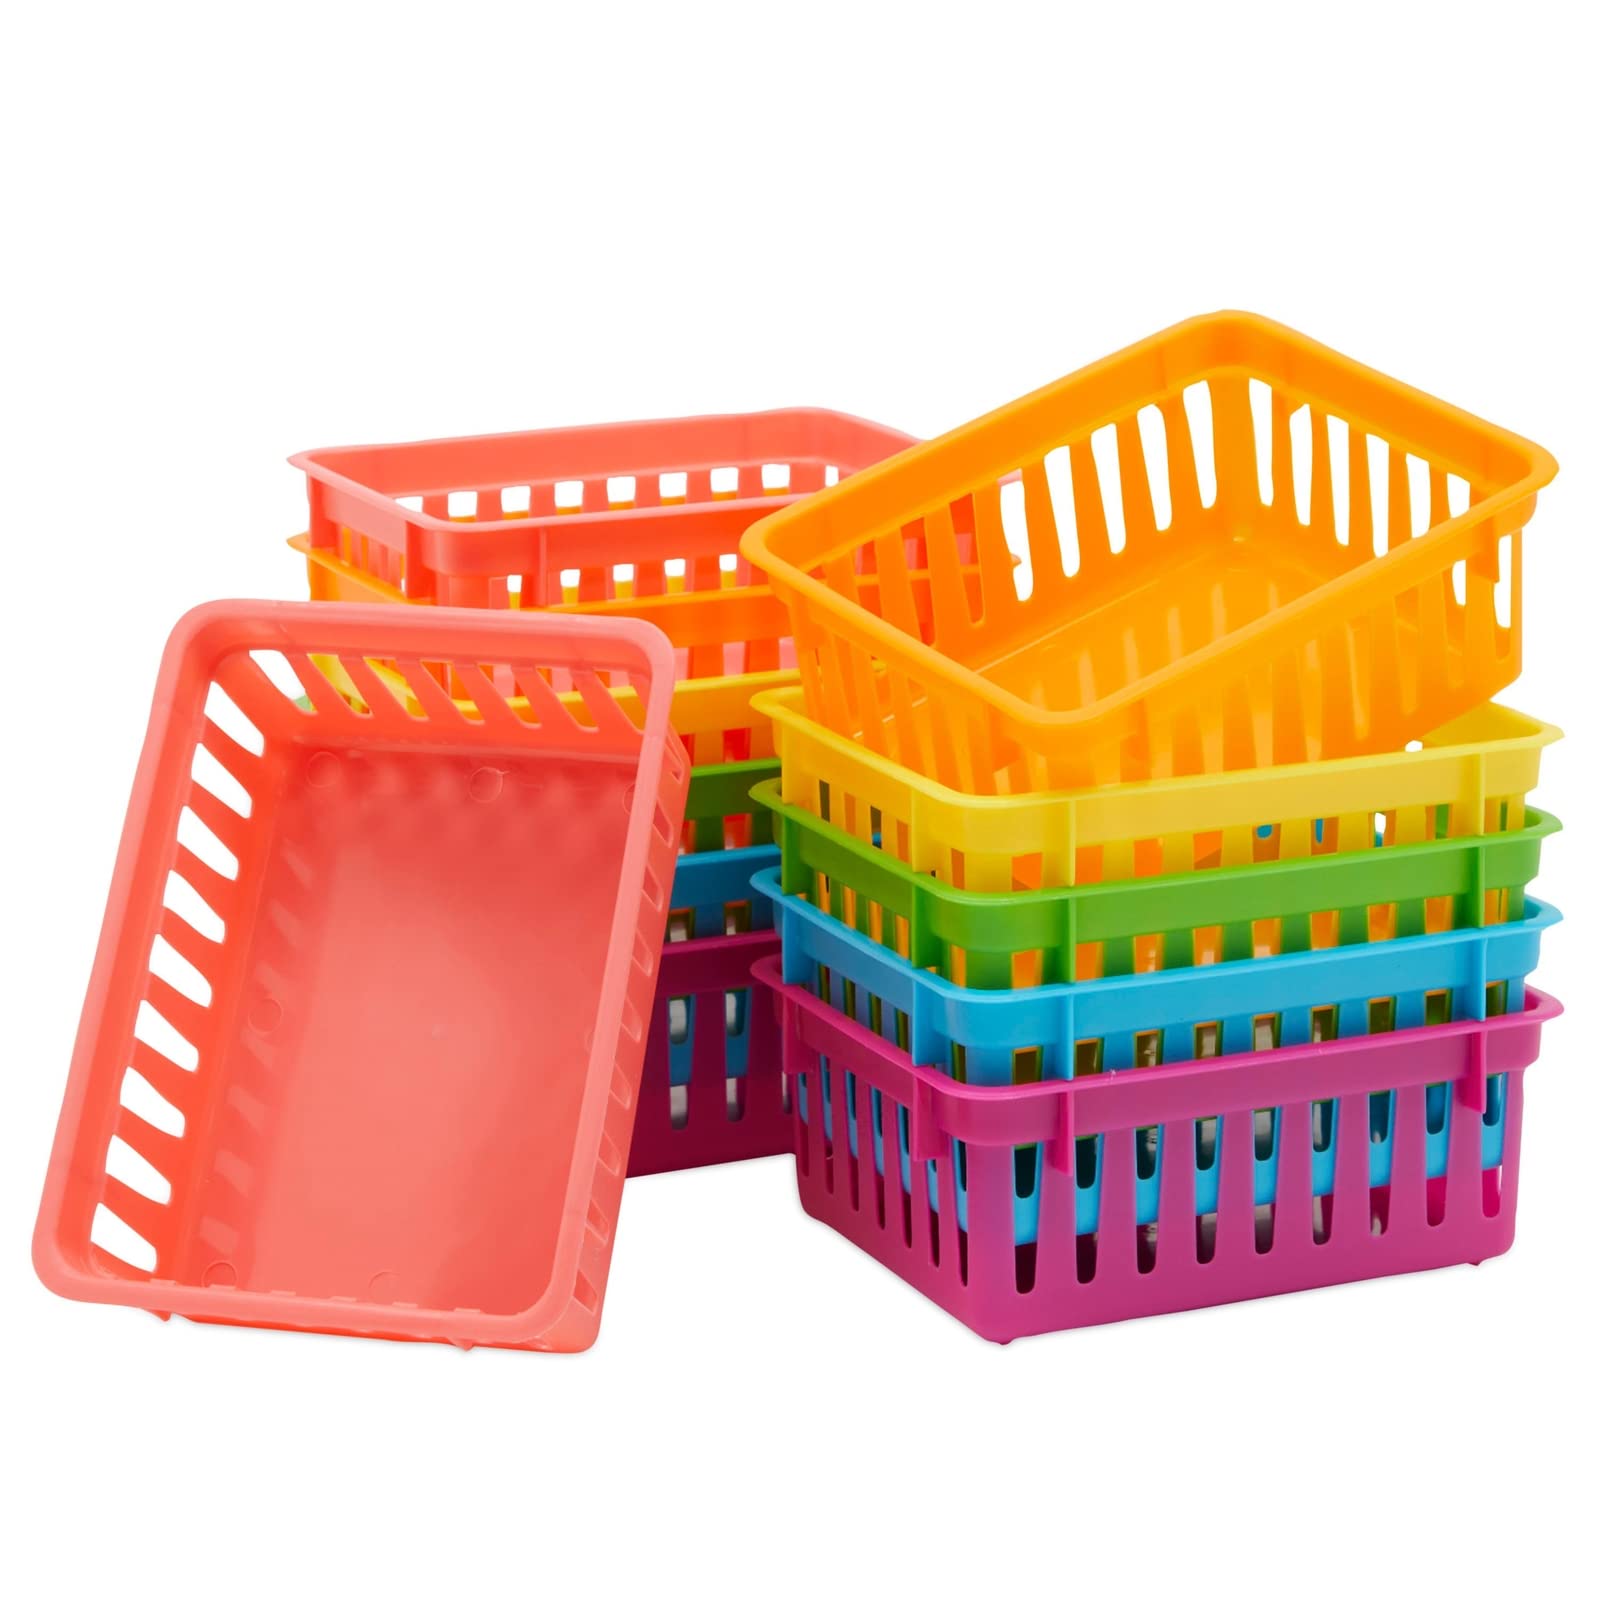  8 Pack Plastic Storage Baskets, Small Pantry Baskets for  Organizing, Woven Basket Organizer Basket Bins for Shelves, Organizer and  Storage for Bathroom, Bedrooms, Kitchens (Multicolour 8PCS)